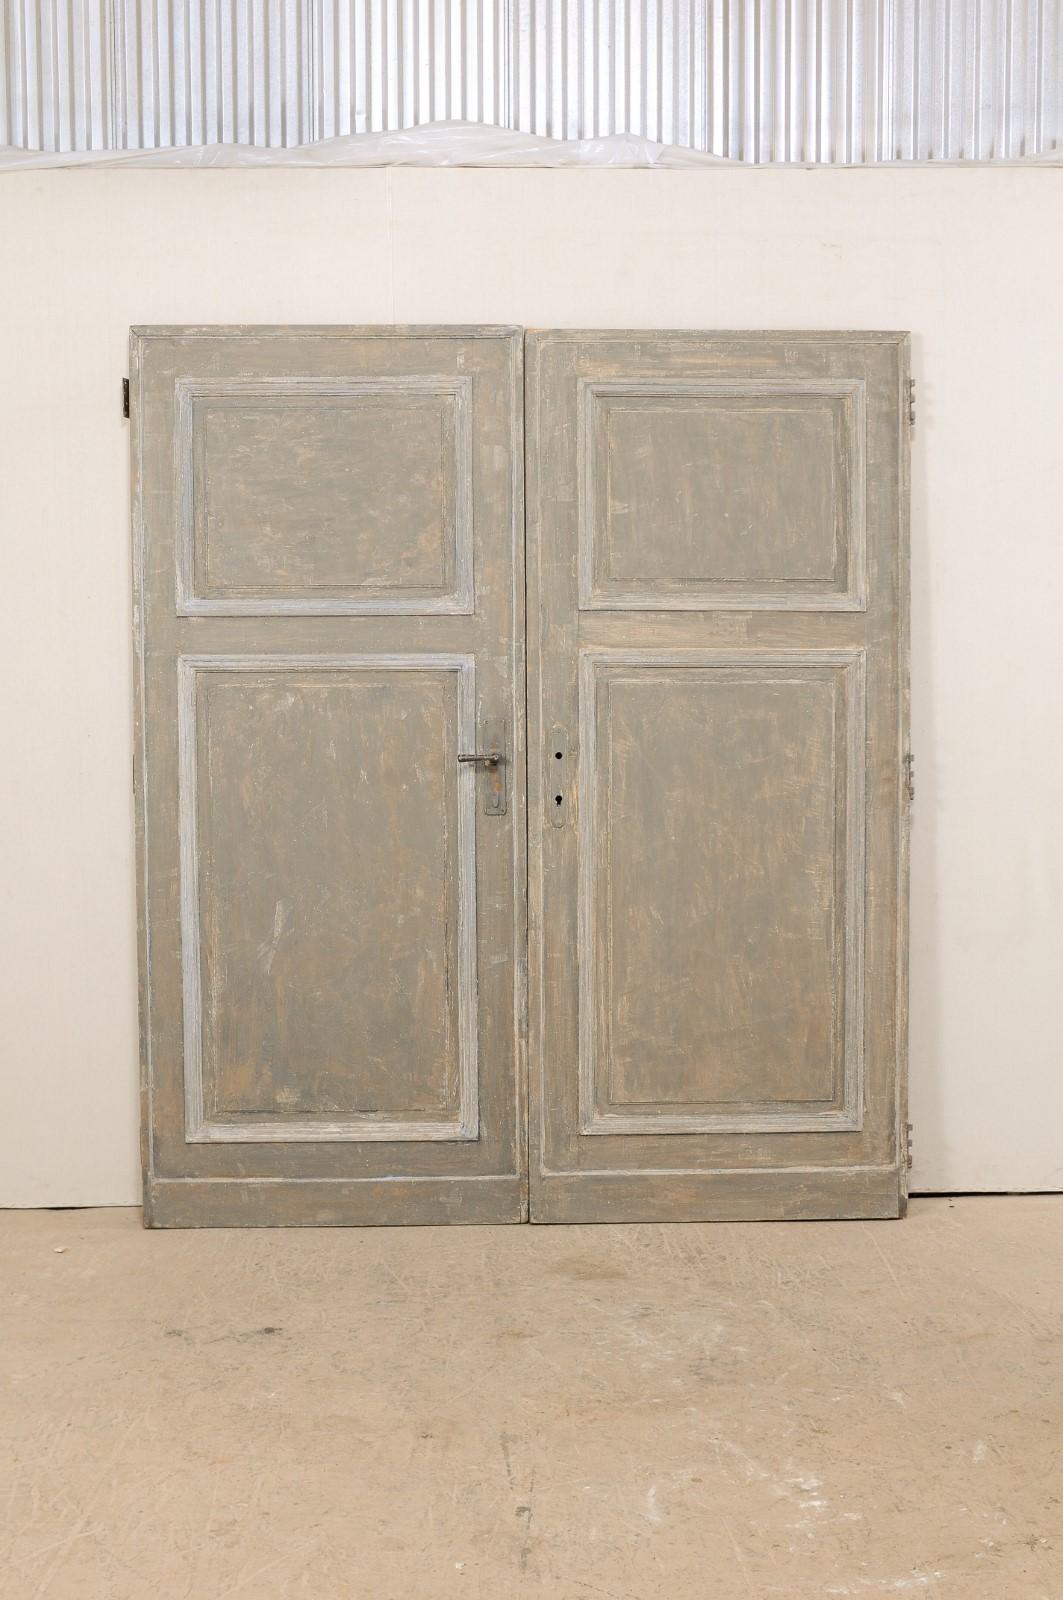 A pair of French painted wood doors from the 19th century. This pair of antique doors from France stand just shy of 7.5 feet in height, have recessed panels at front and backsides, with smaller square panel at top and rectangular panel within bottom